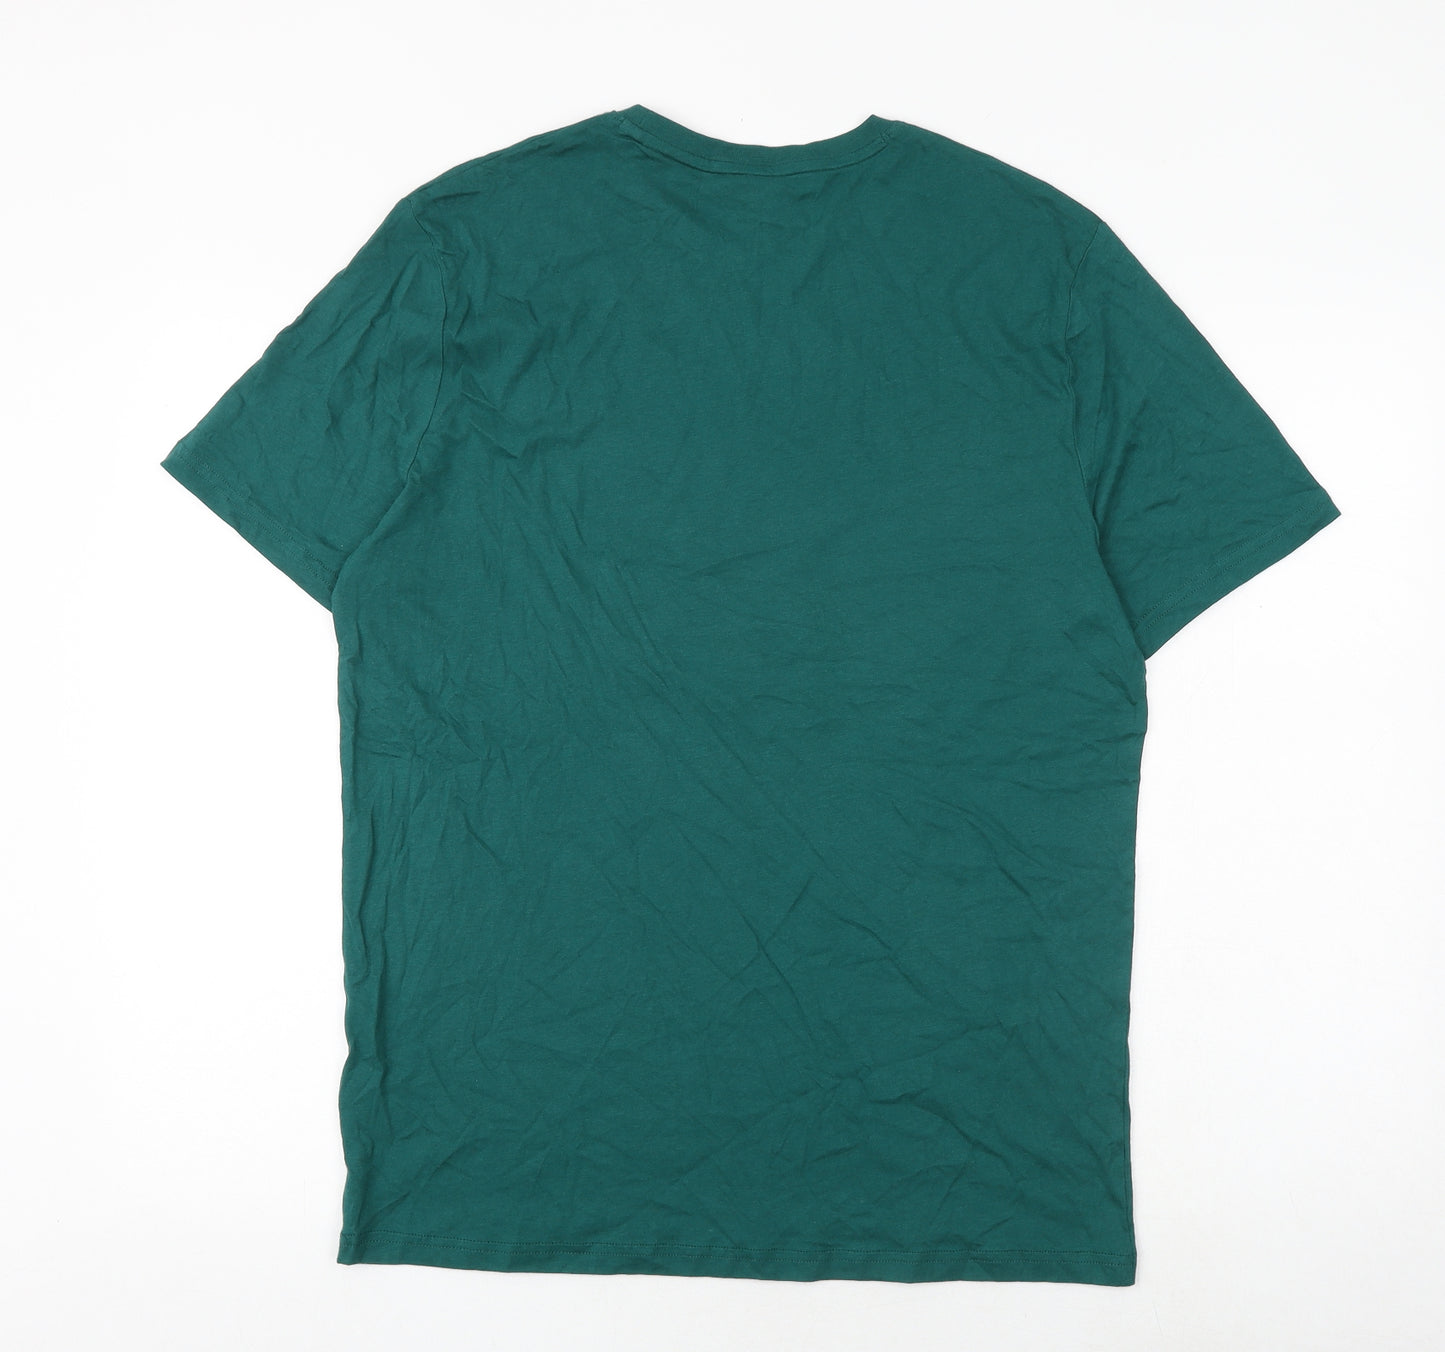 Marks and Spencer Mens Green Cotton T-Shirt Size L Round Neck - Christmas Gin-gle all the way